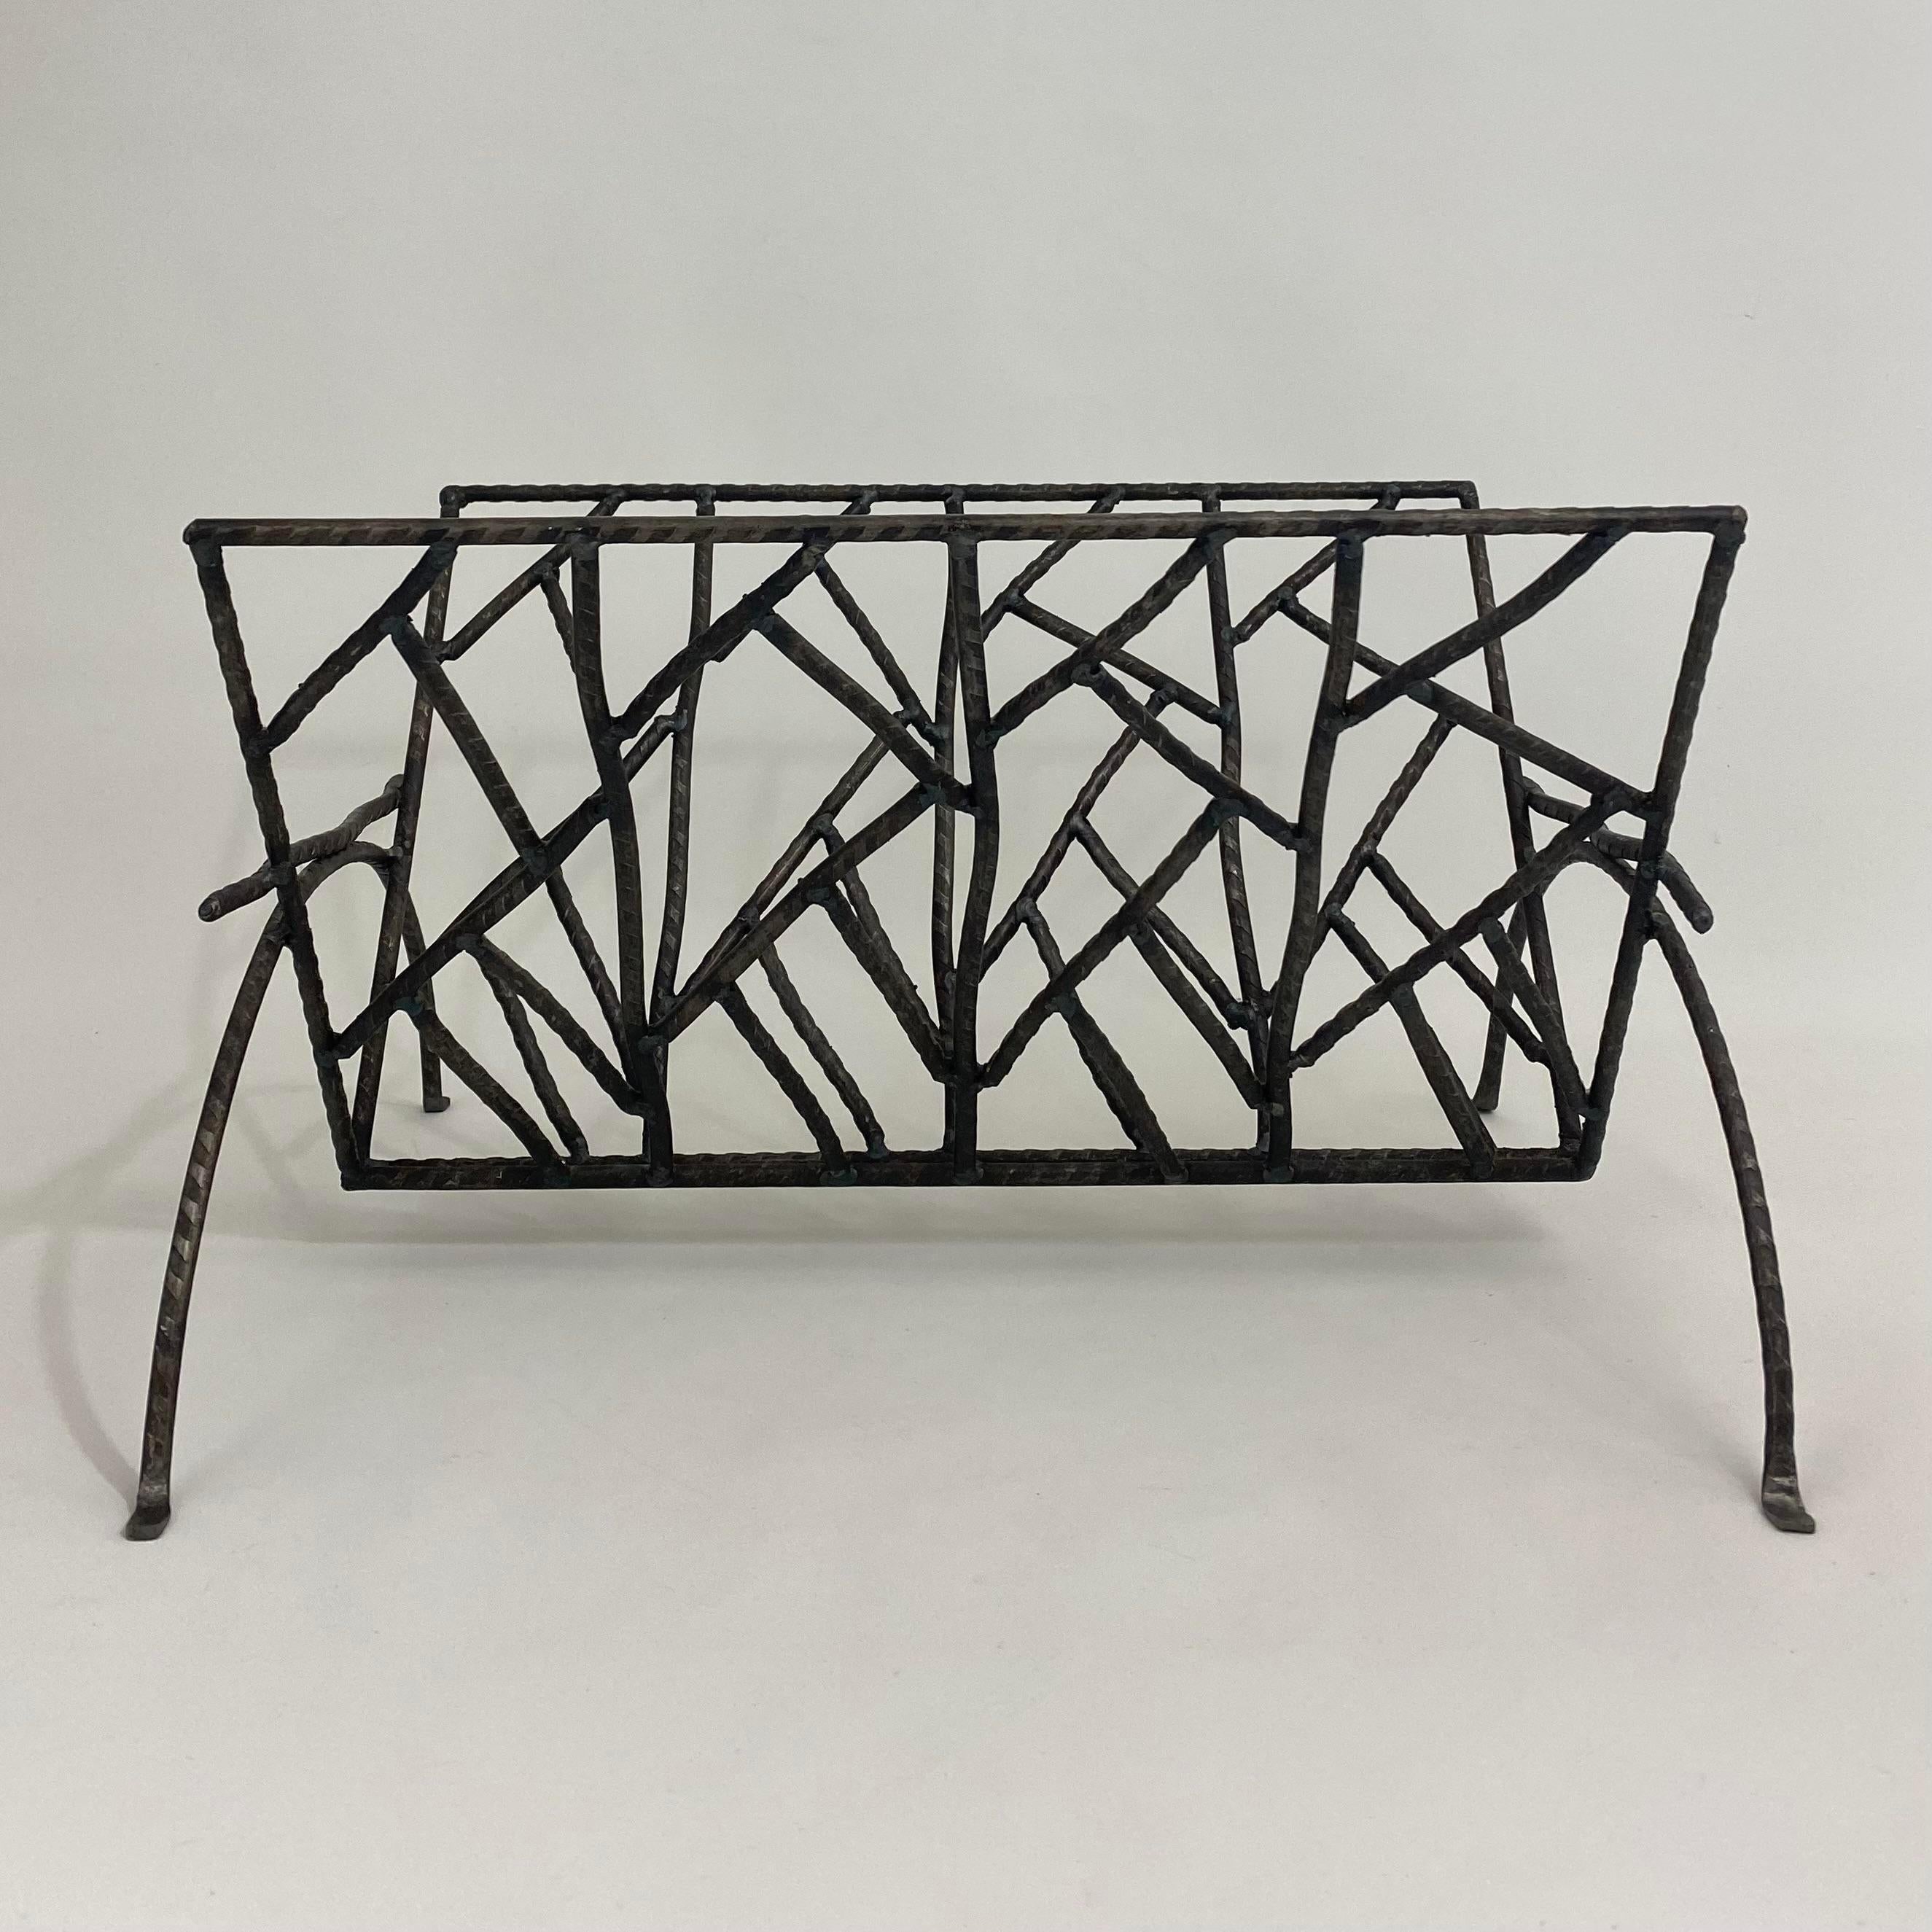 Circa 1980s artist studio brutalist magazine rack. Geometric welded iron pattern. One of a kind item. Can hold books or magazines.